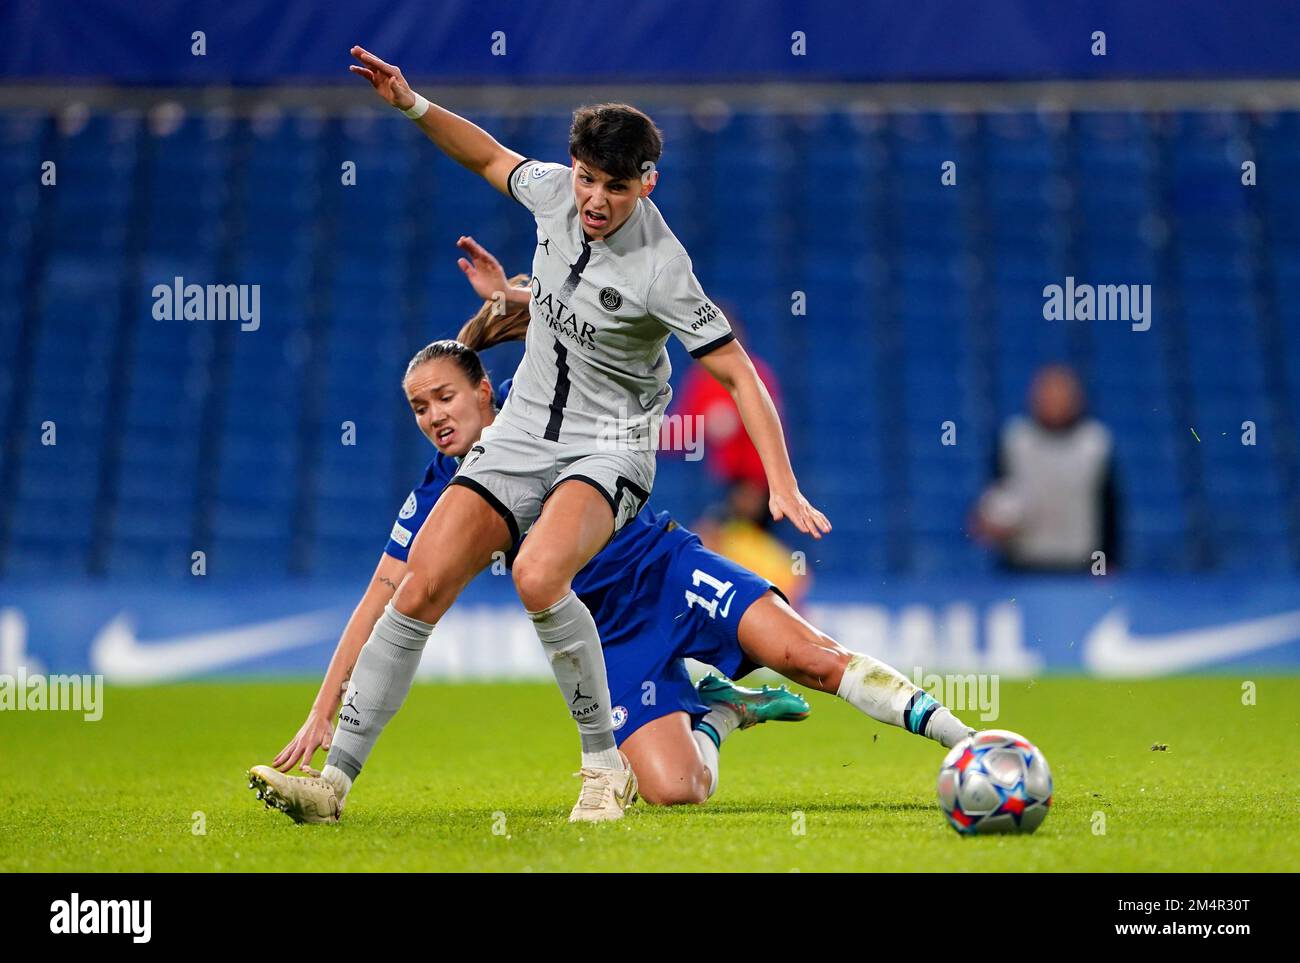 Chelsea's Guro Reiten goes down whilst battling for the ball against Paris Saint-Germain's Elisa de Almeida during the UEFA Women's Champions League Group A match at Stamford Bridge, London. Picture date: Thursday December 22, 2022. Stock Photo